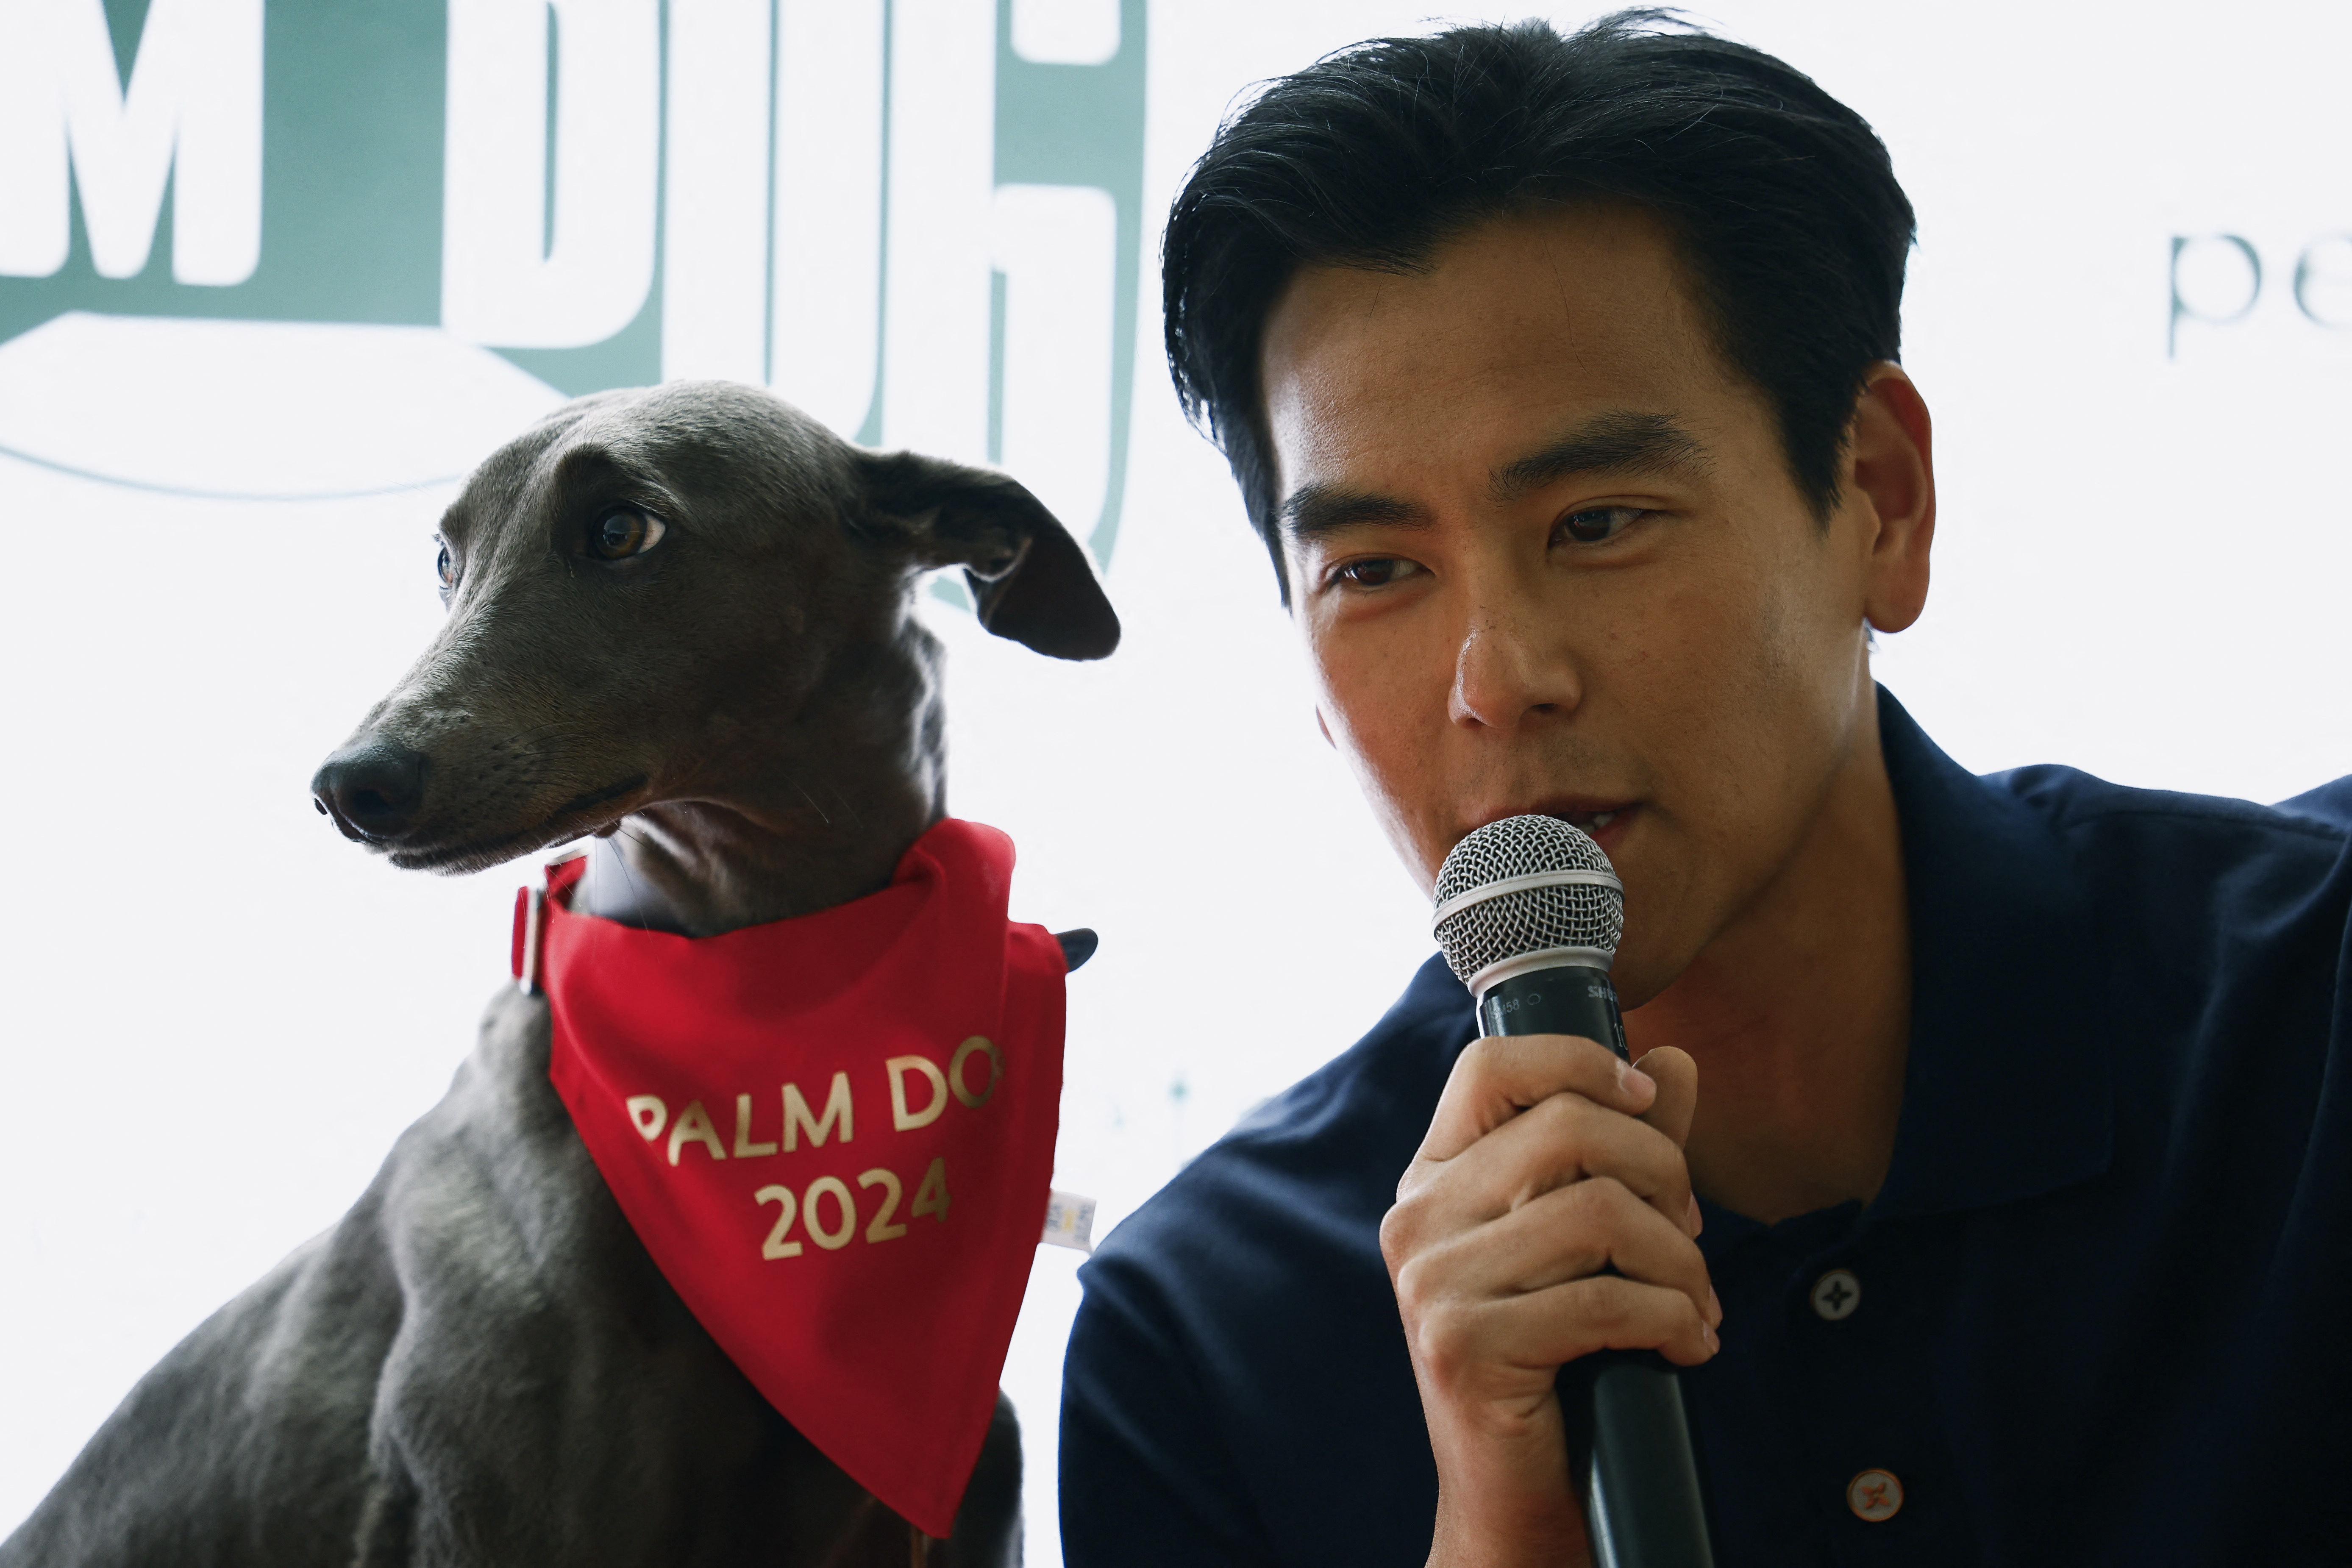 The 77th Cannes Film Festival - The Palm Dog Award